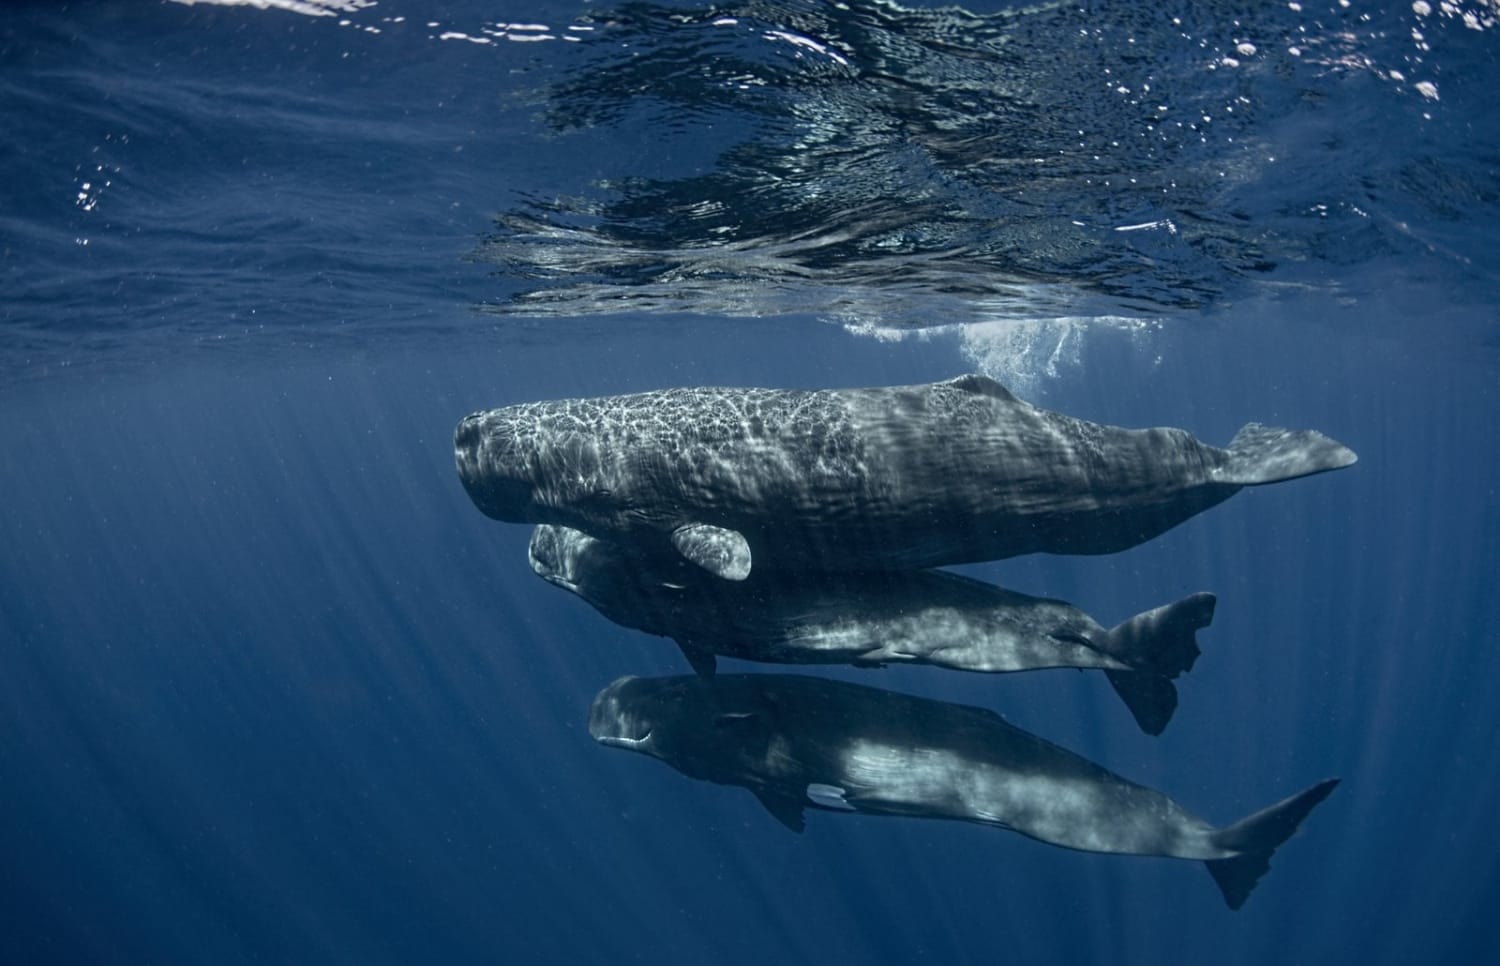 An ambitious project is attempting to interpret sperm whale clicks with artificial intelligence, then talk back to them